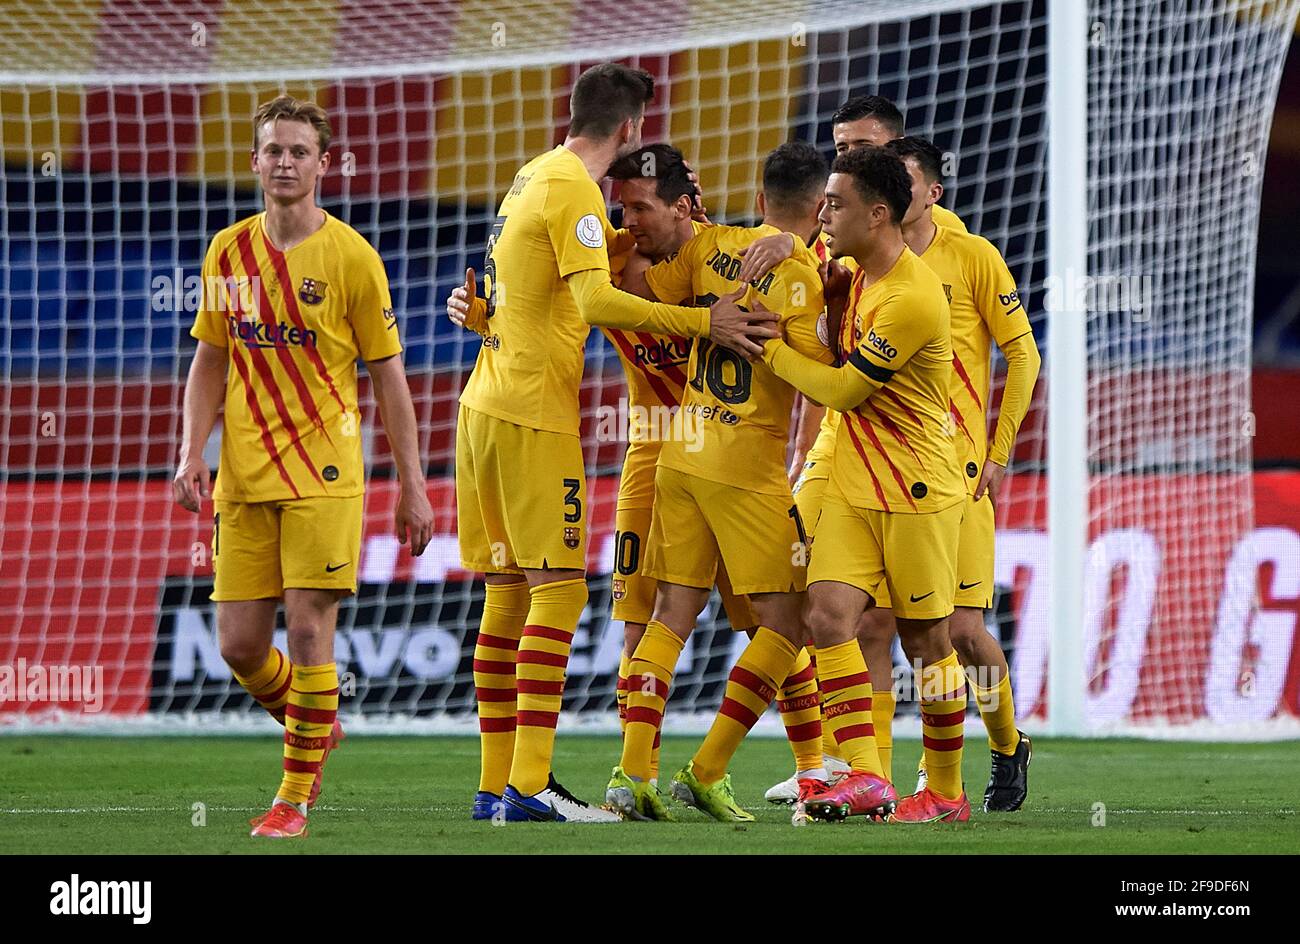 Seville, Spain. 17th Apr, 2021. Players of Barcelona celebrate for a goal during the 2020-21 season Spanish King's Cup final match between Athletic Bilbao and FC Barcelona in Seville, Spain, on April 17, 2021. Credit: Pablo Morano/Xinhua/Alamy Live News Stock Photo